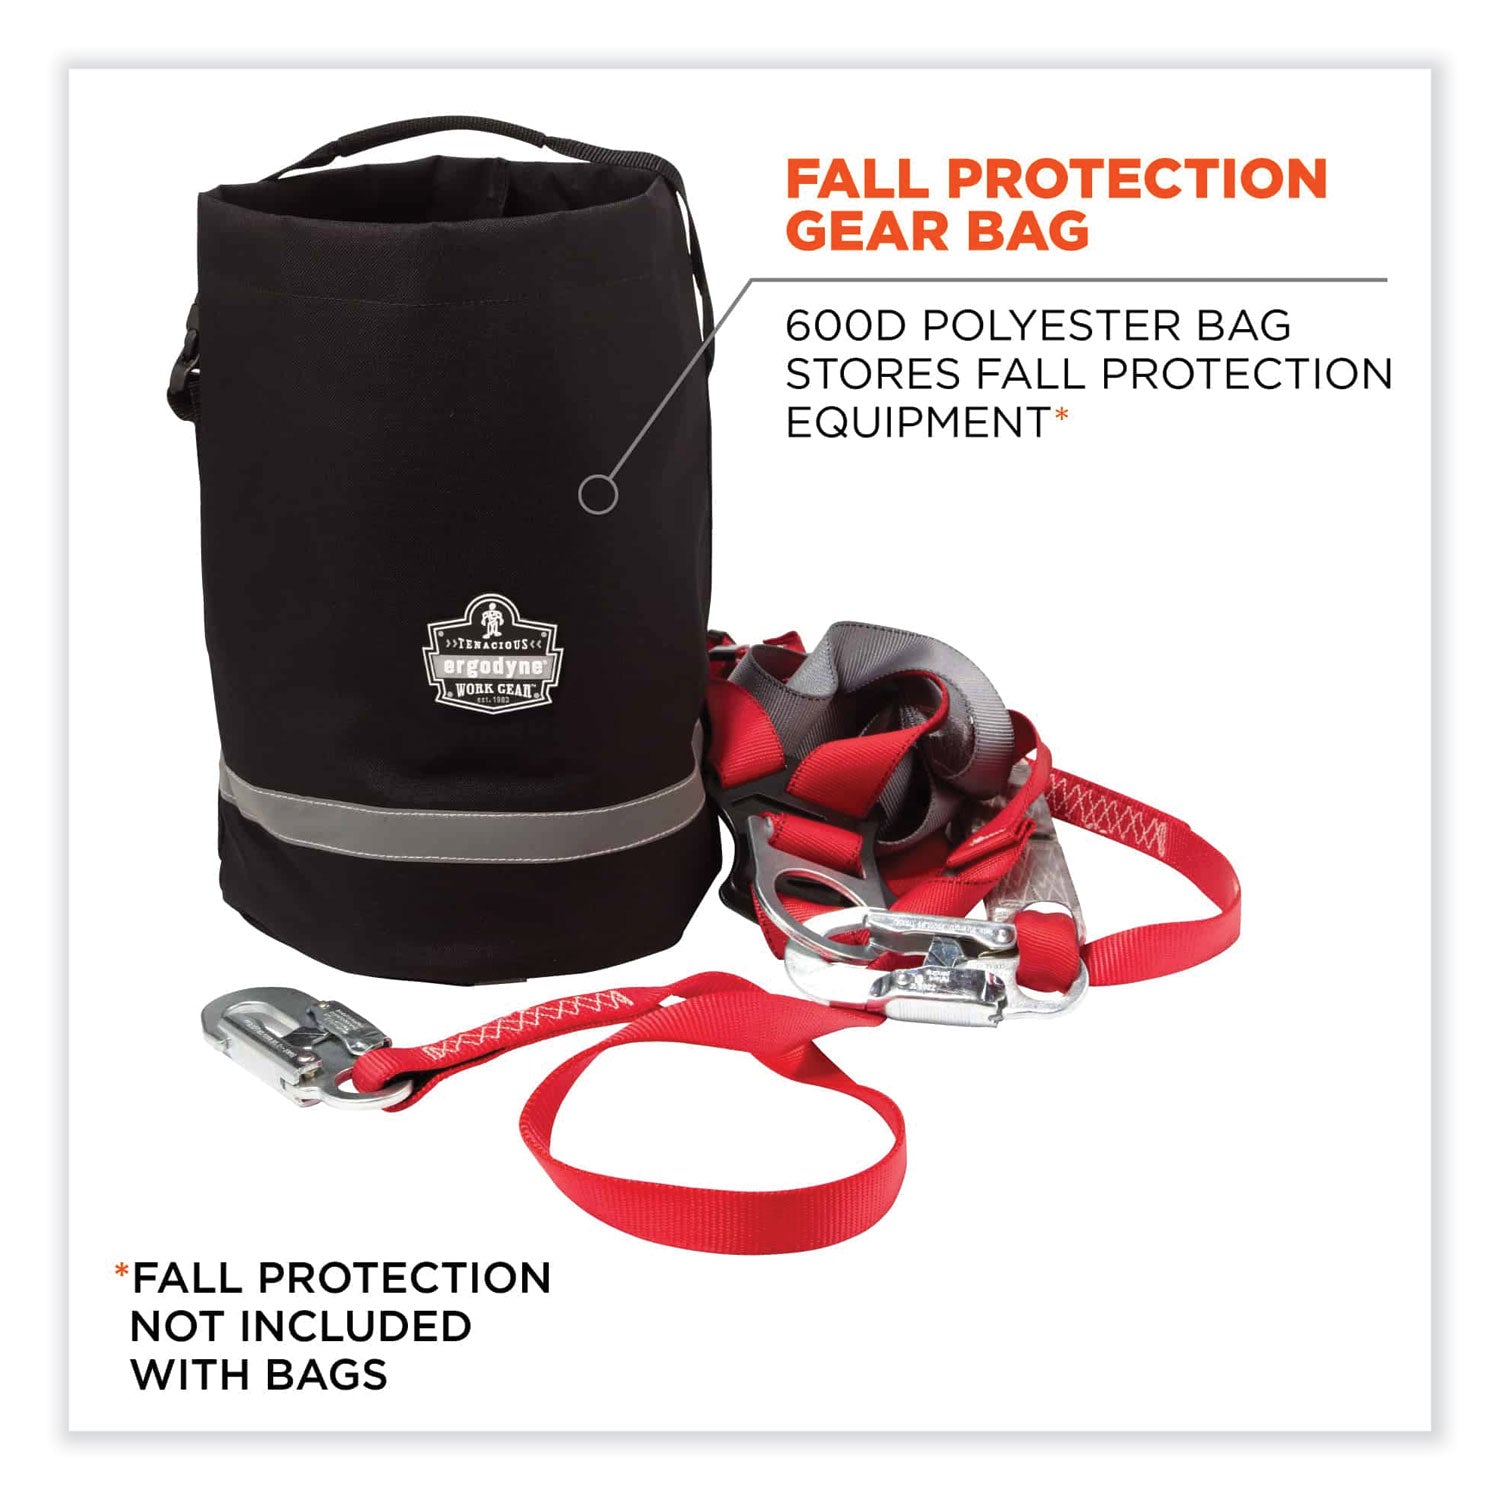 arsenal-5130-fall-protection-bag-10-x-10-x-15-black-ships-in-1-3-business-days_ego13130 - 2